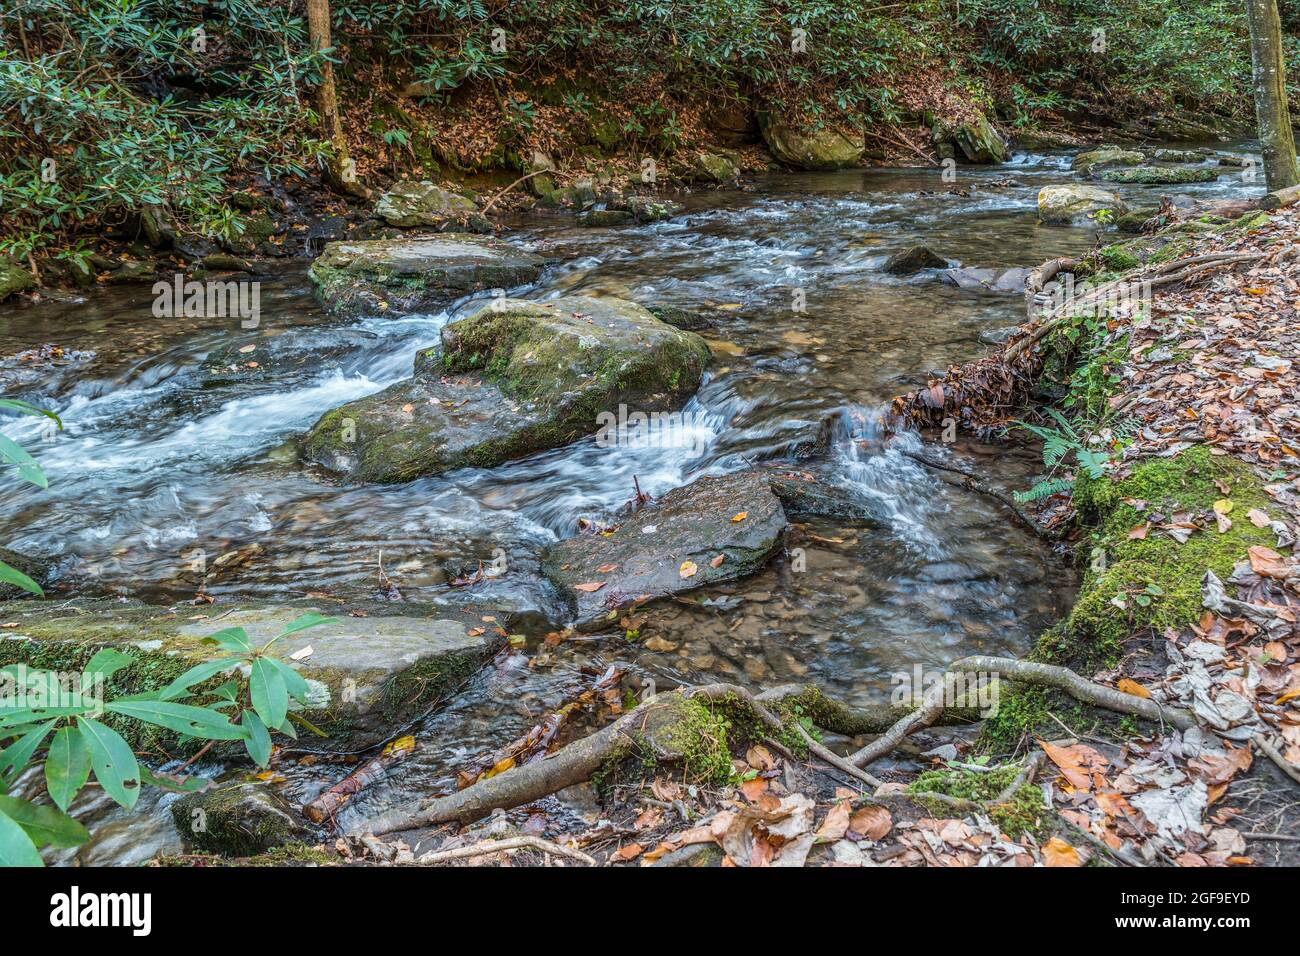 Closeup view of the water rushing around and over the rocks and boulders of the river flowing downstream in the mountains in autumn Stock Photo